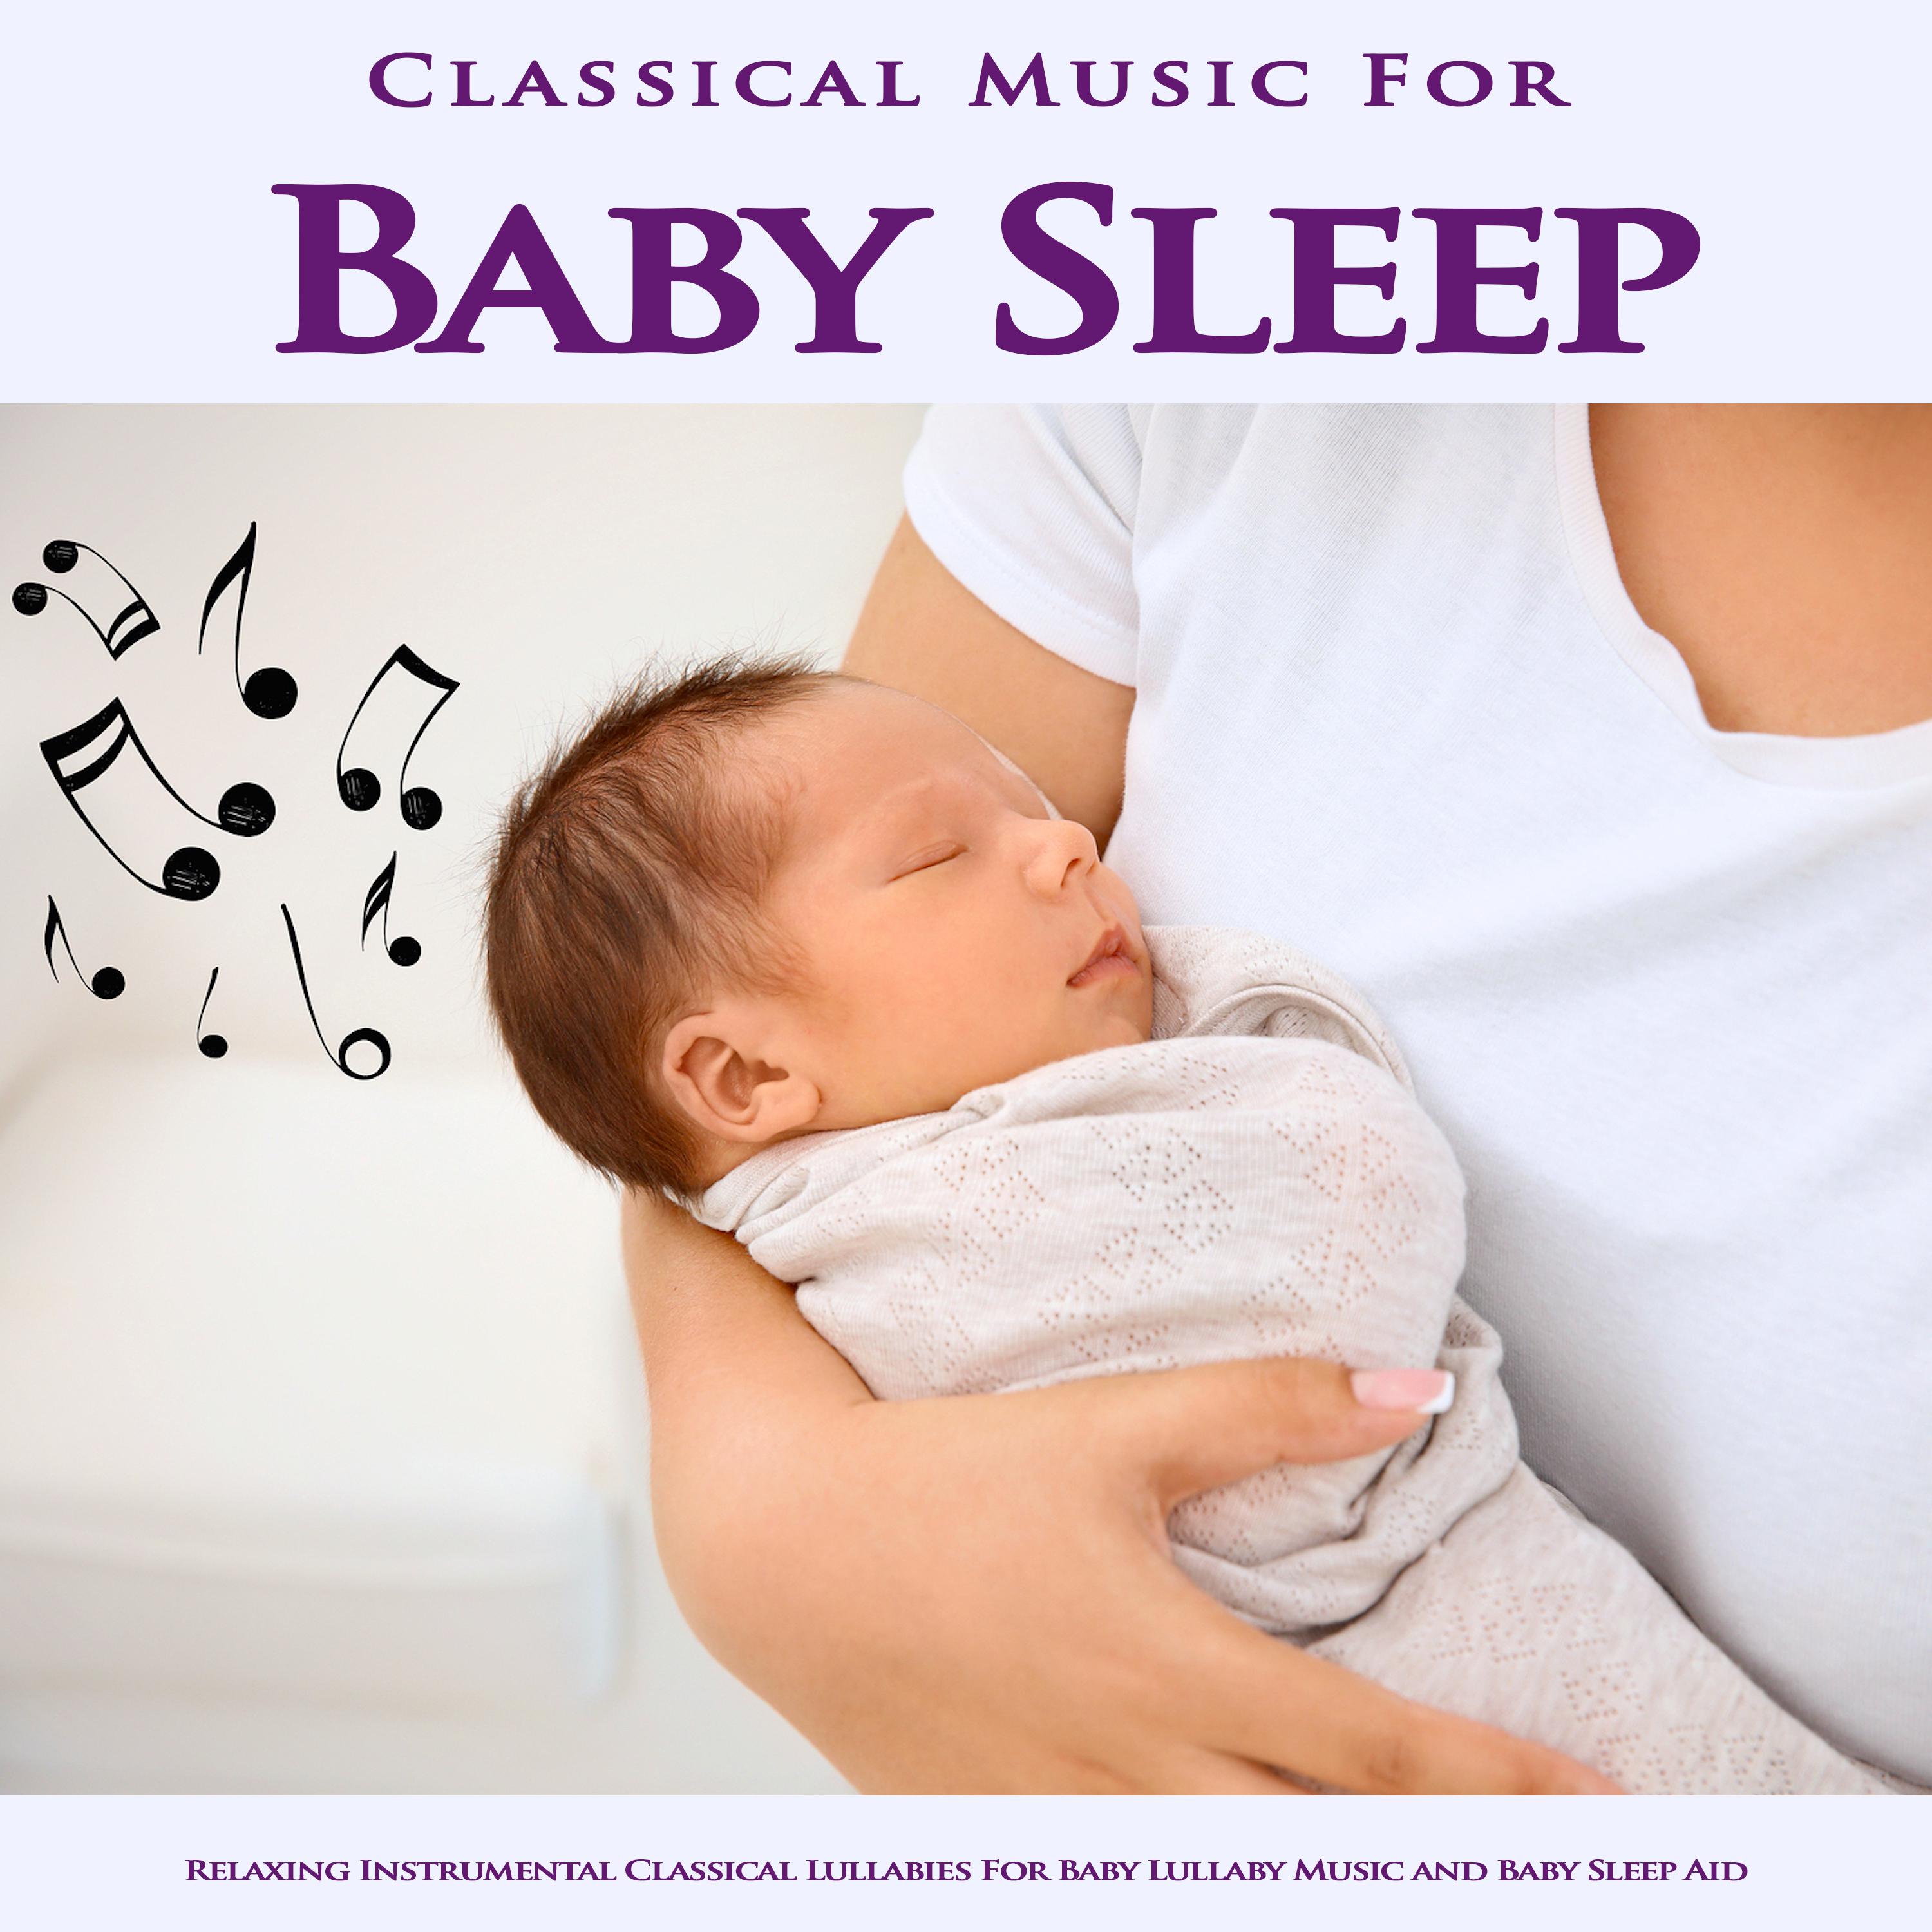 Reverie - Debussy - Rain Sounds Baby Sleep Aid - Classical Baby Lullabies